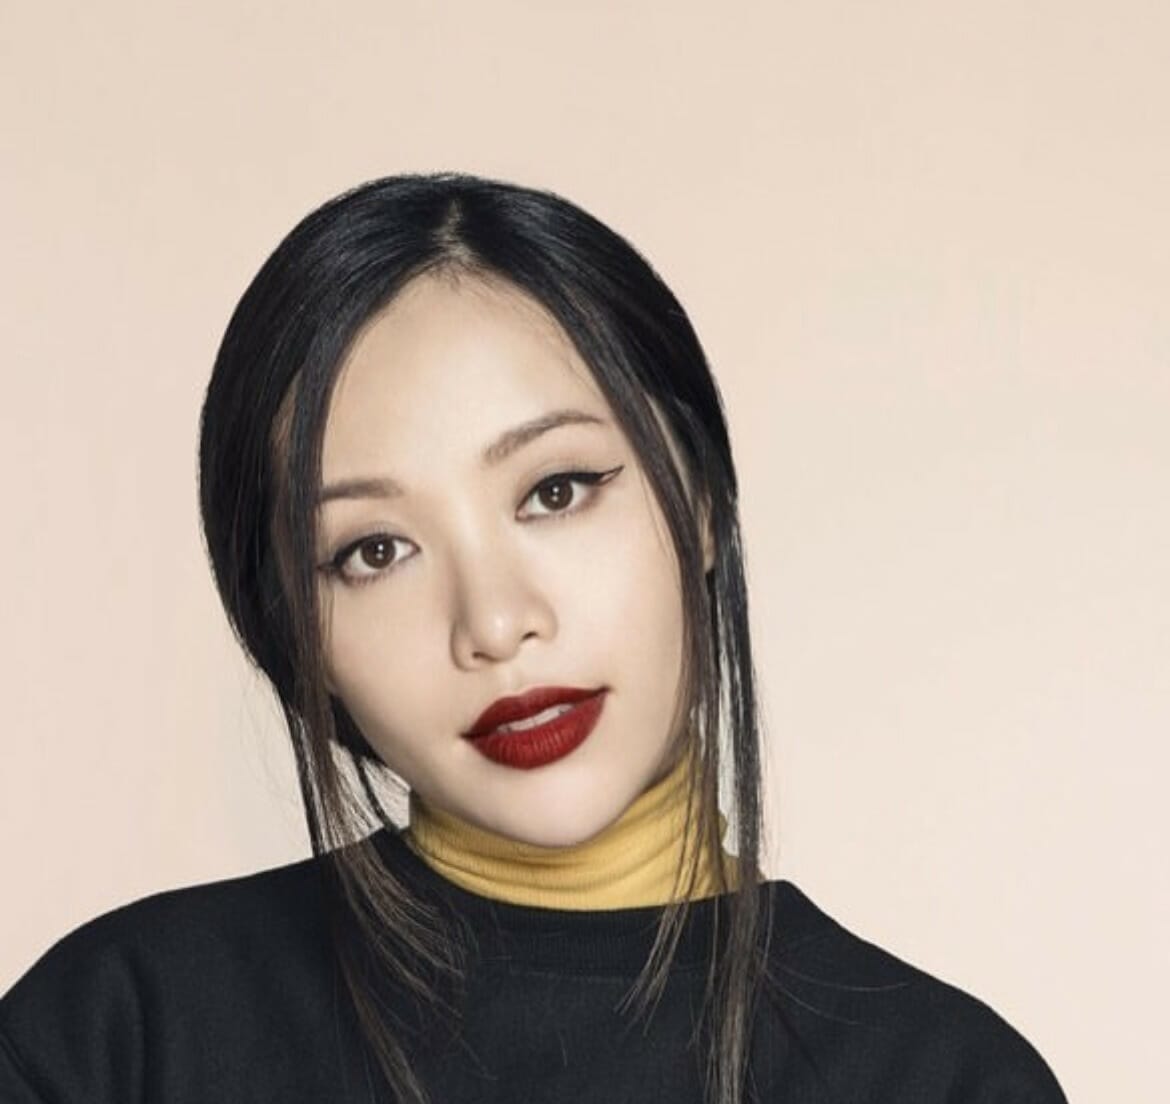 Michelle Phan with new Em cosmetics products